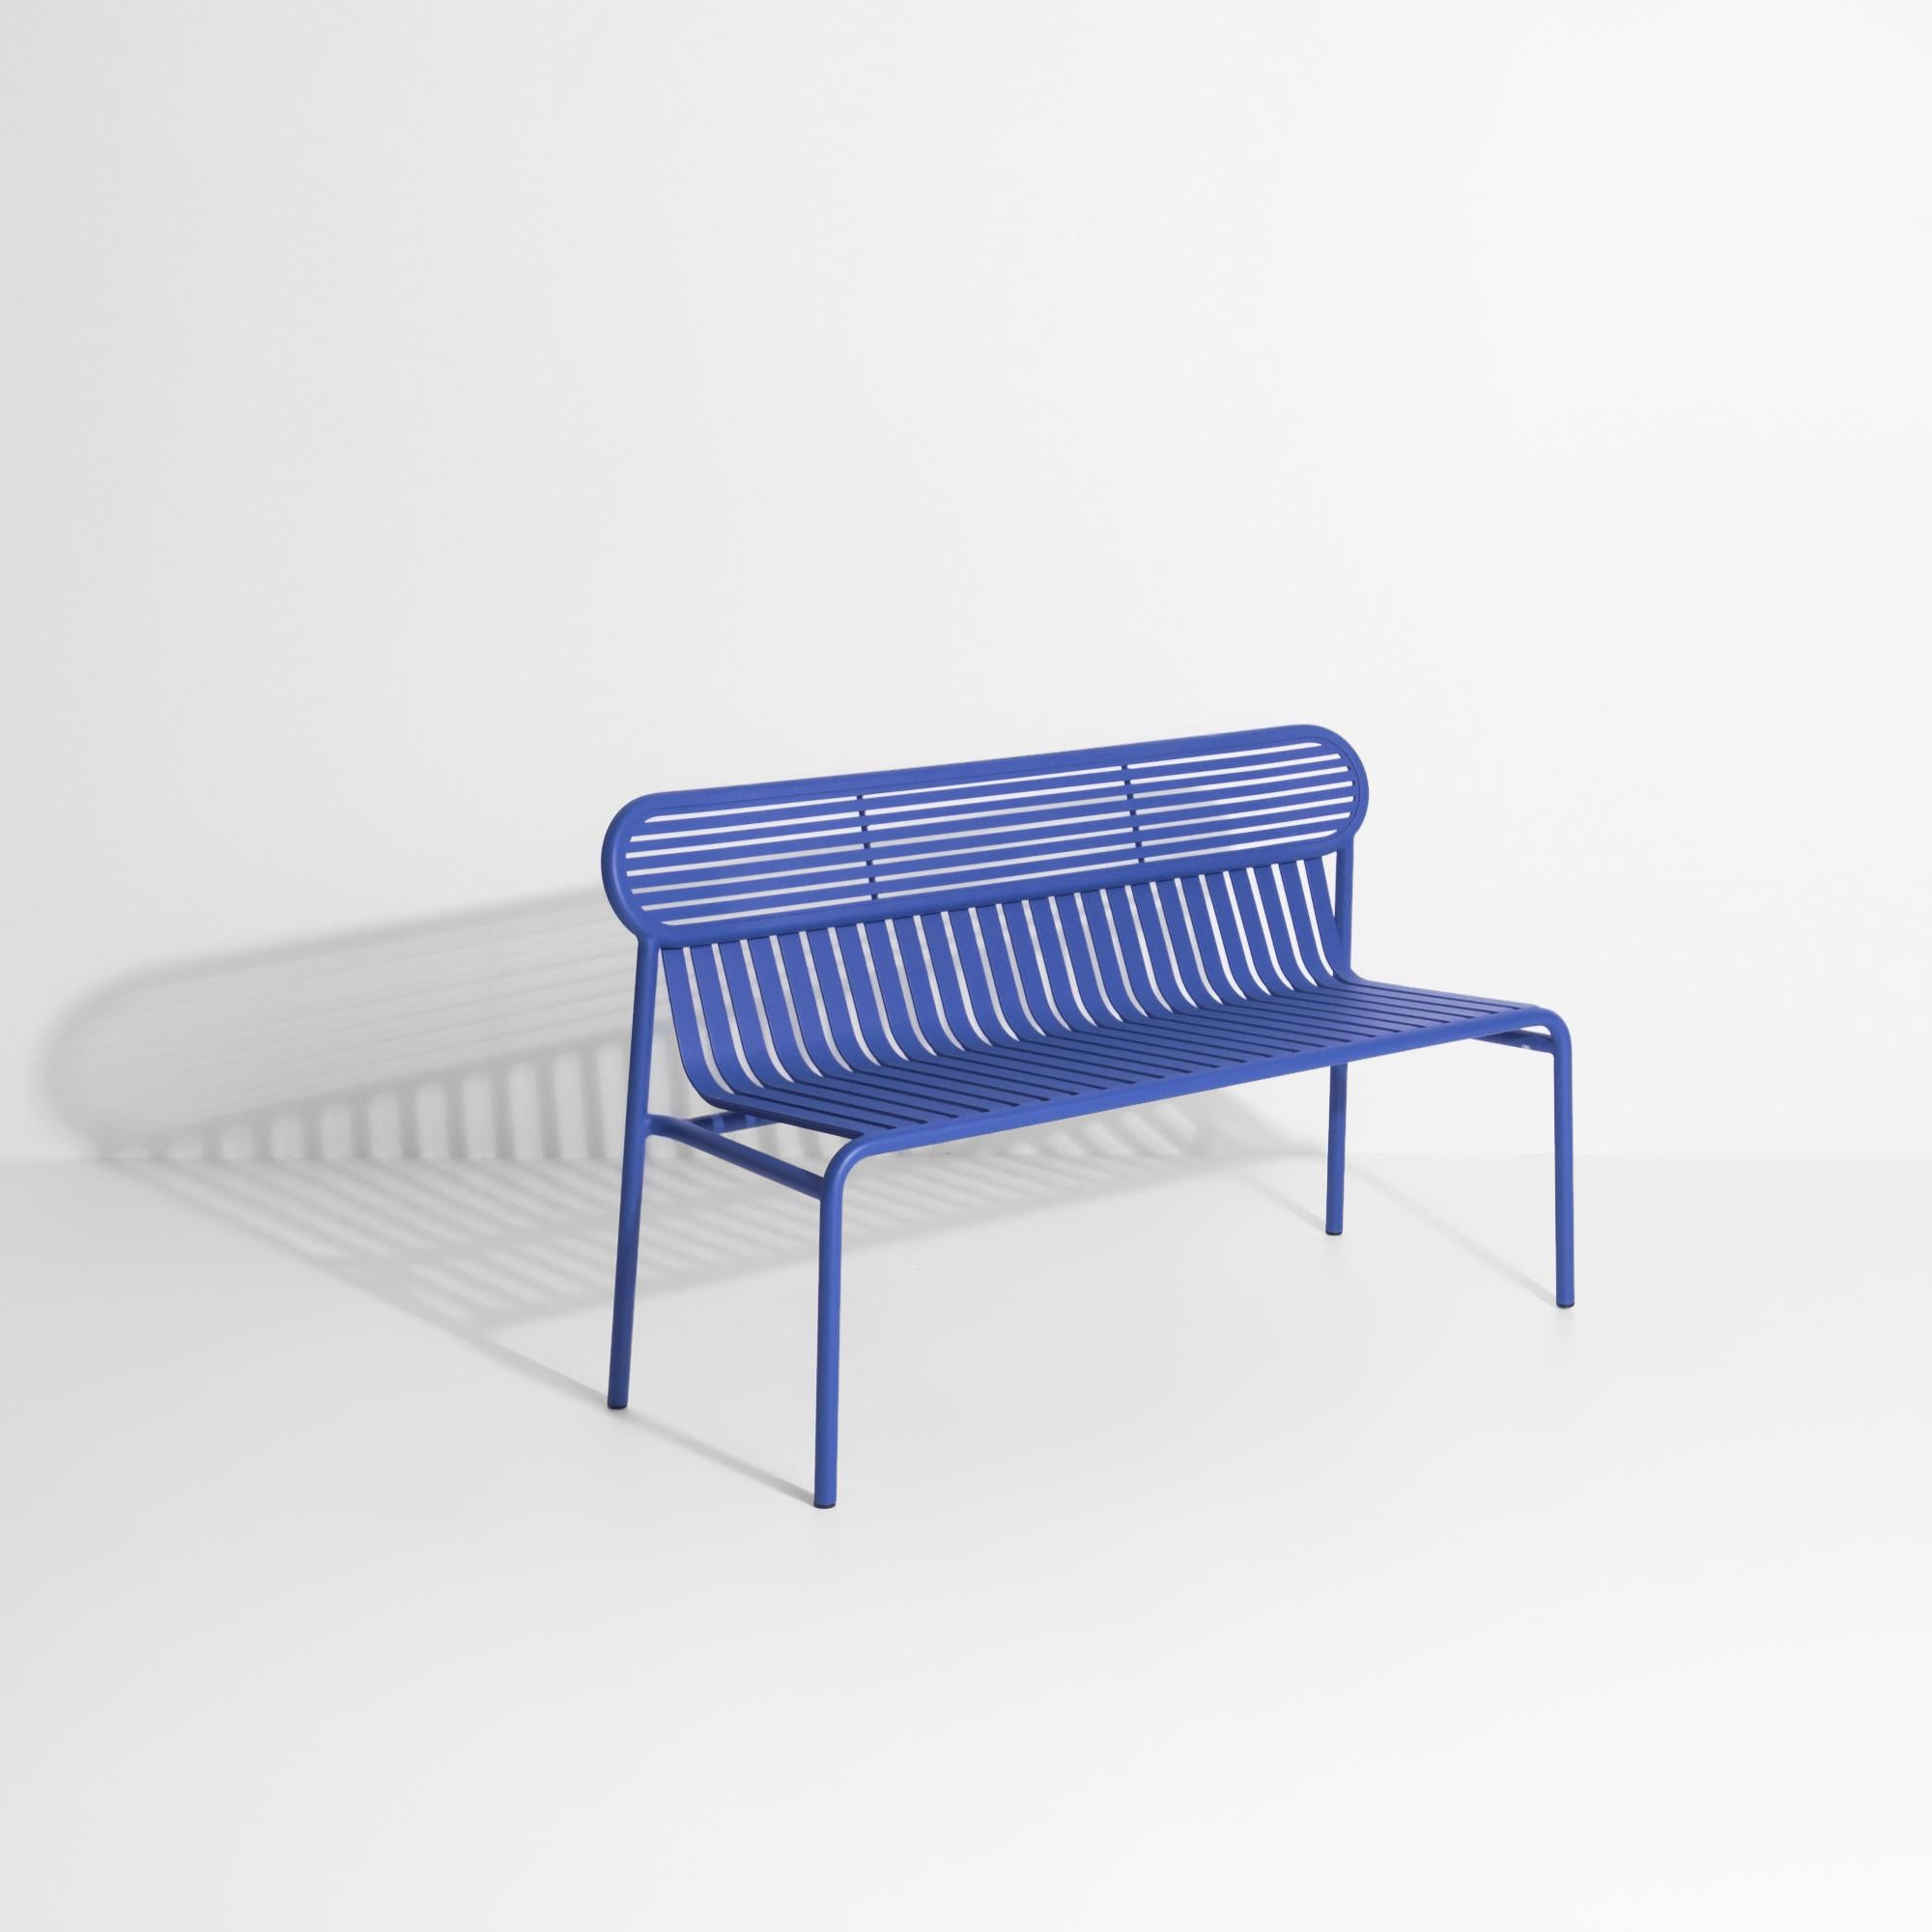 Contemporary Petite Friture Week-End Bench in Blue Aluminium by Studio BrichetZiegler For Sale